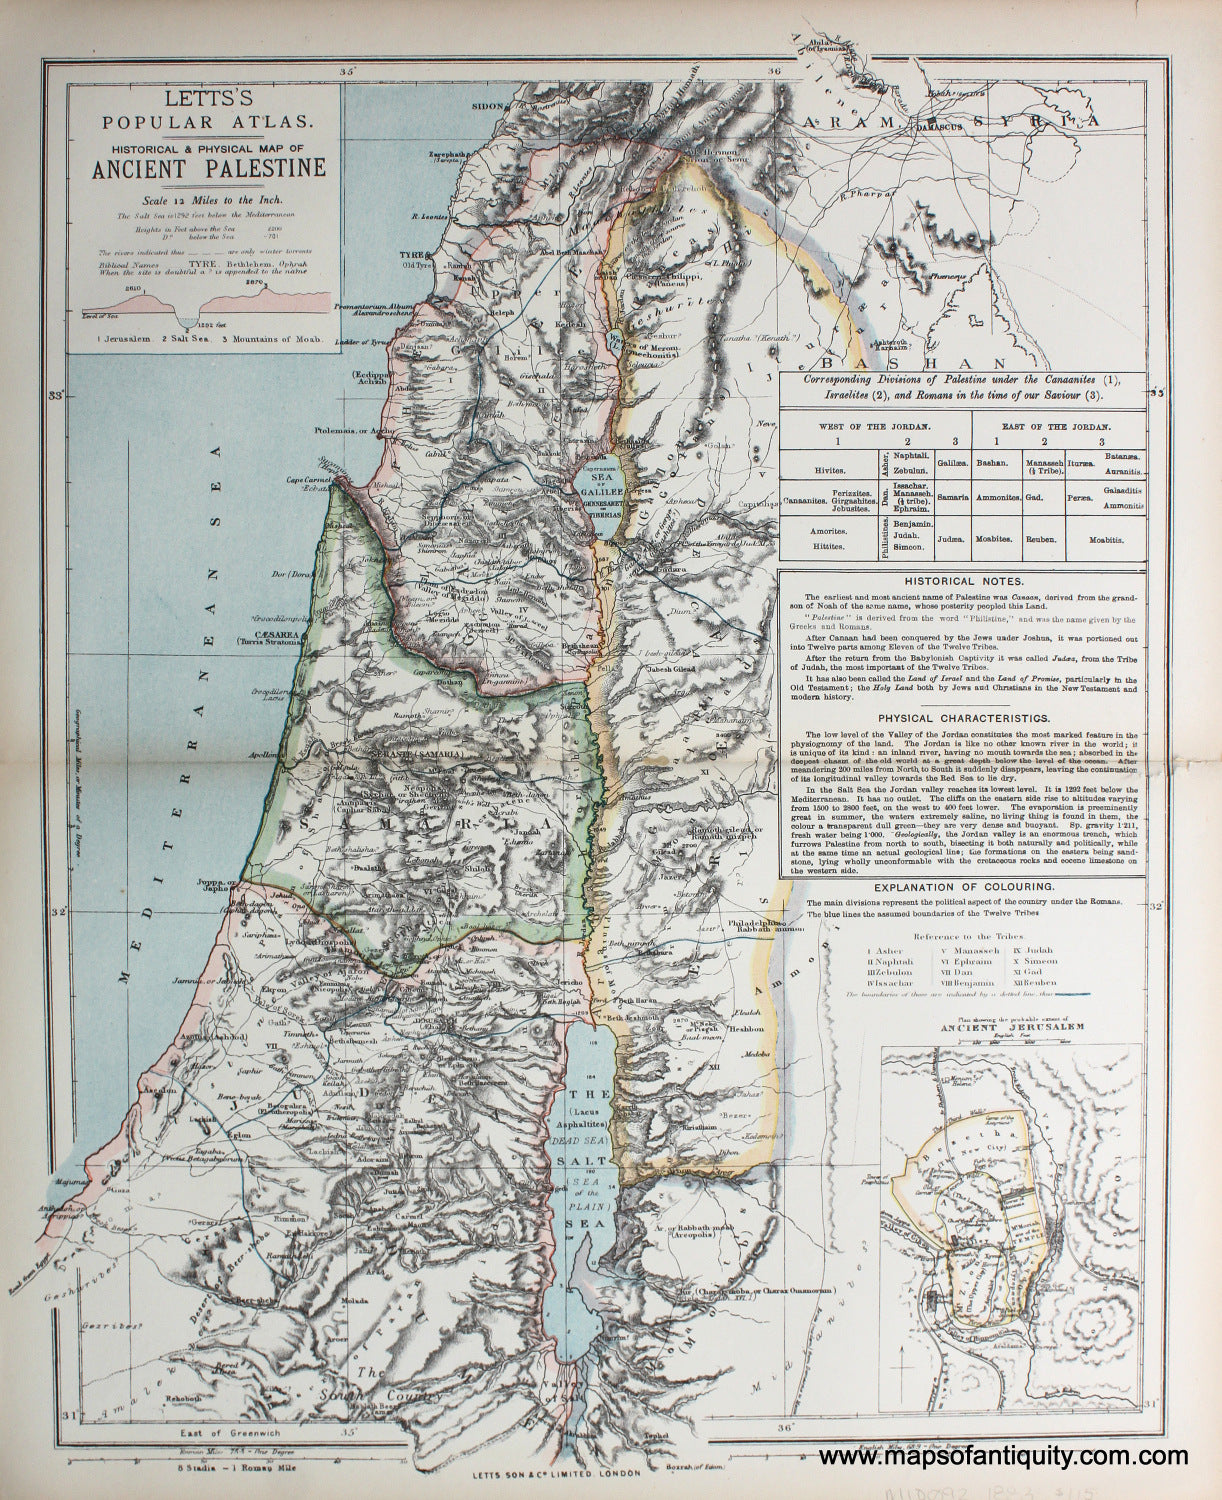 printed-color-Antique-Map-Historical-and-Physical-Map-of-Ancient-Palestine-******-Middle-East-and-Holy-Land-Middle-East-1883-Letts-Maps-Of-Antiquity